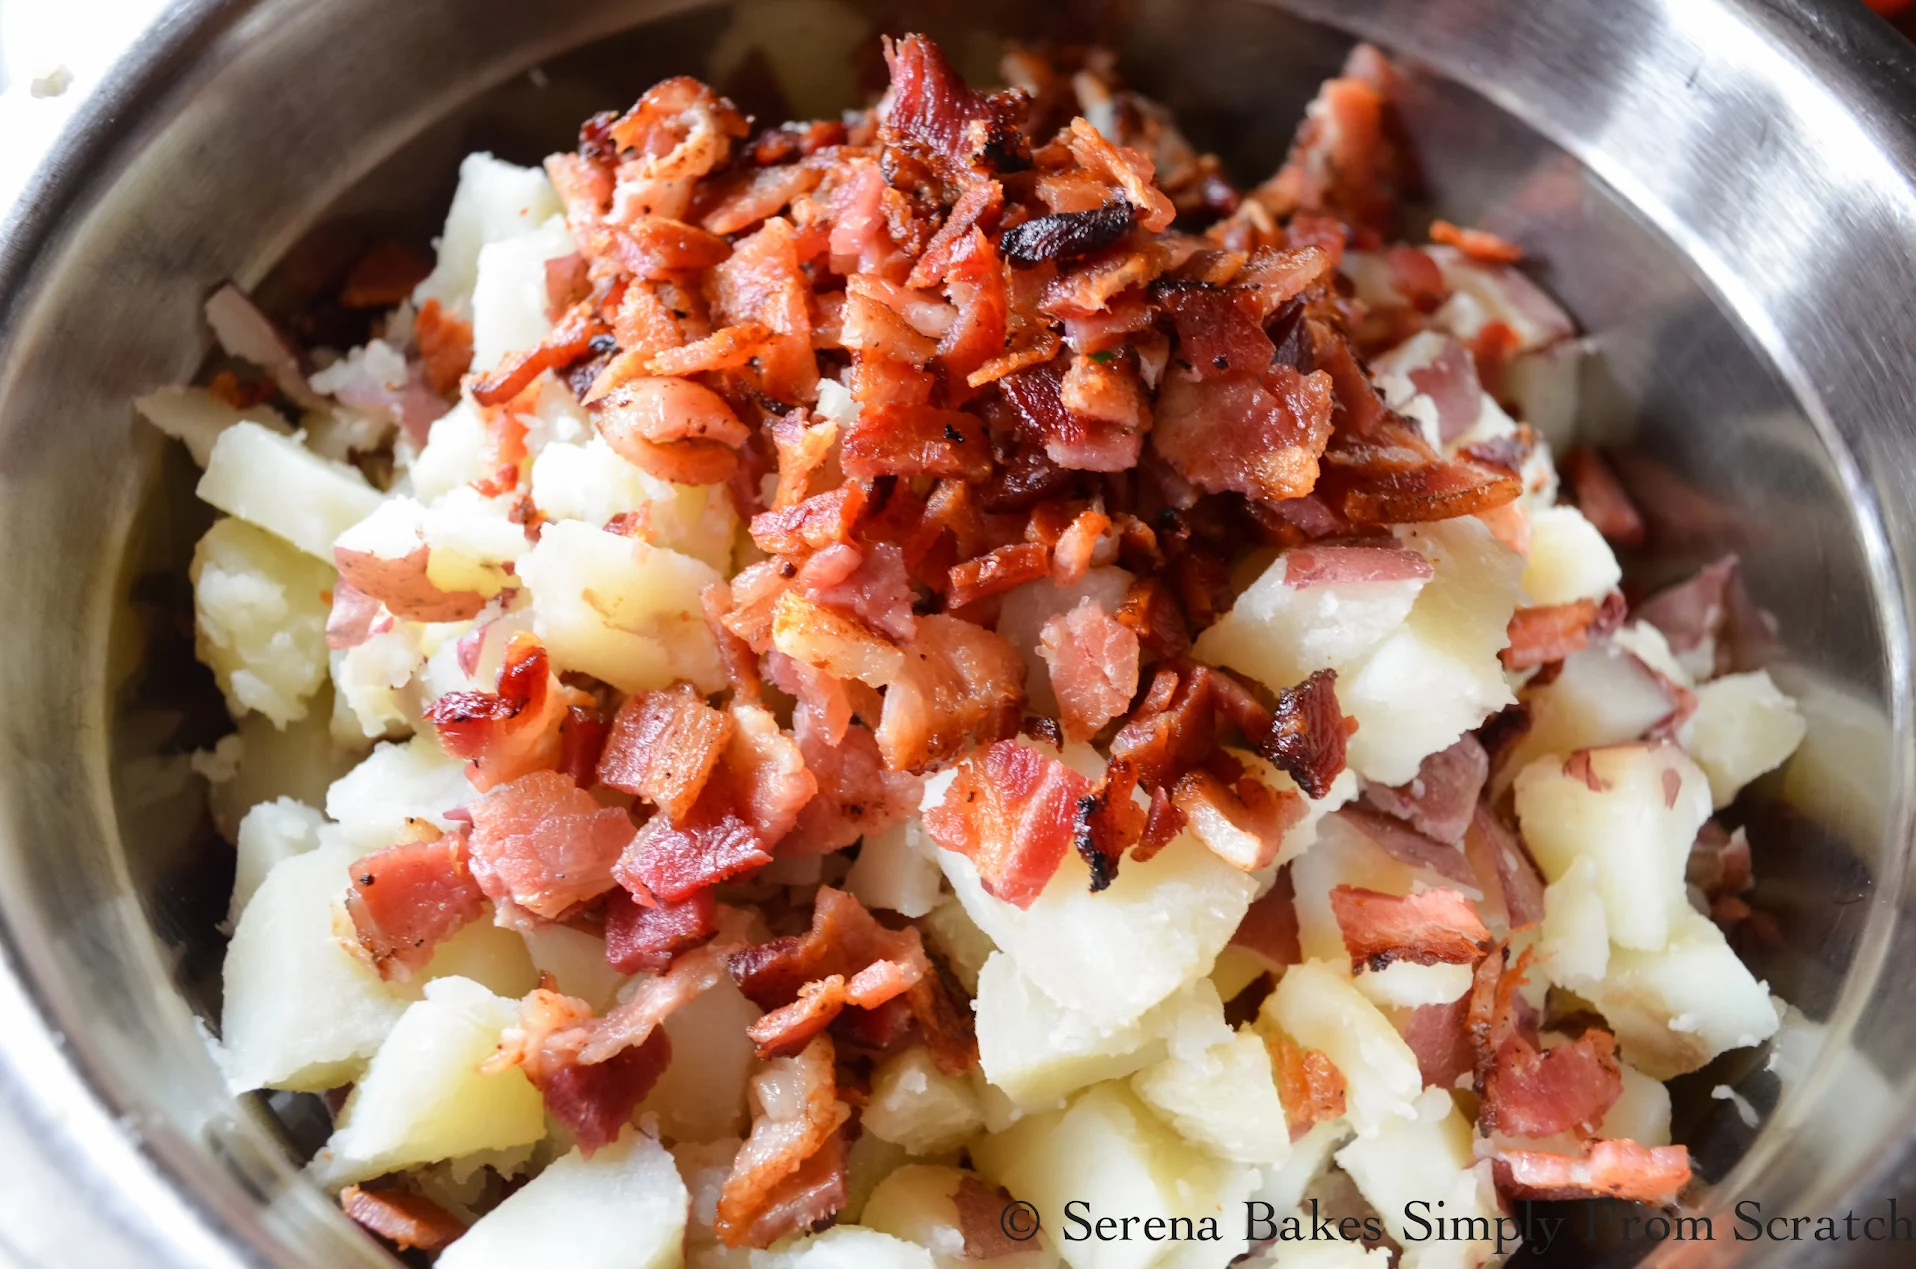 A large stainless steel bowl fully of cooked diced red potatoes with skins, and diced cooked bacon.